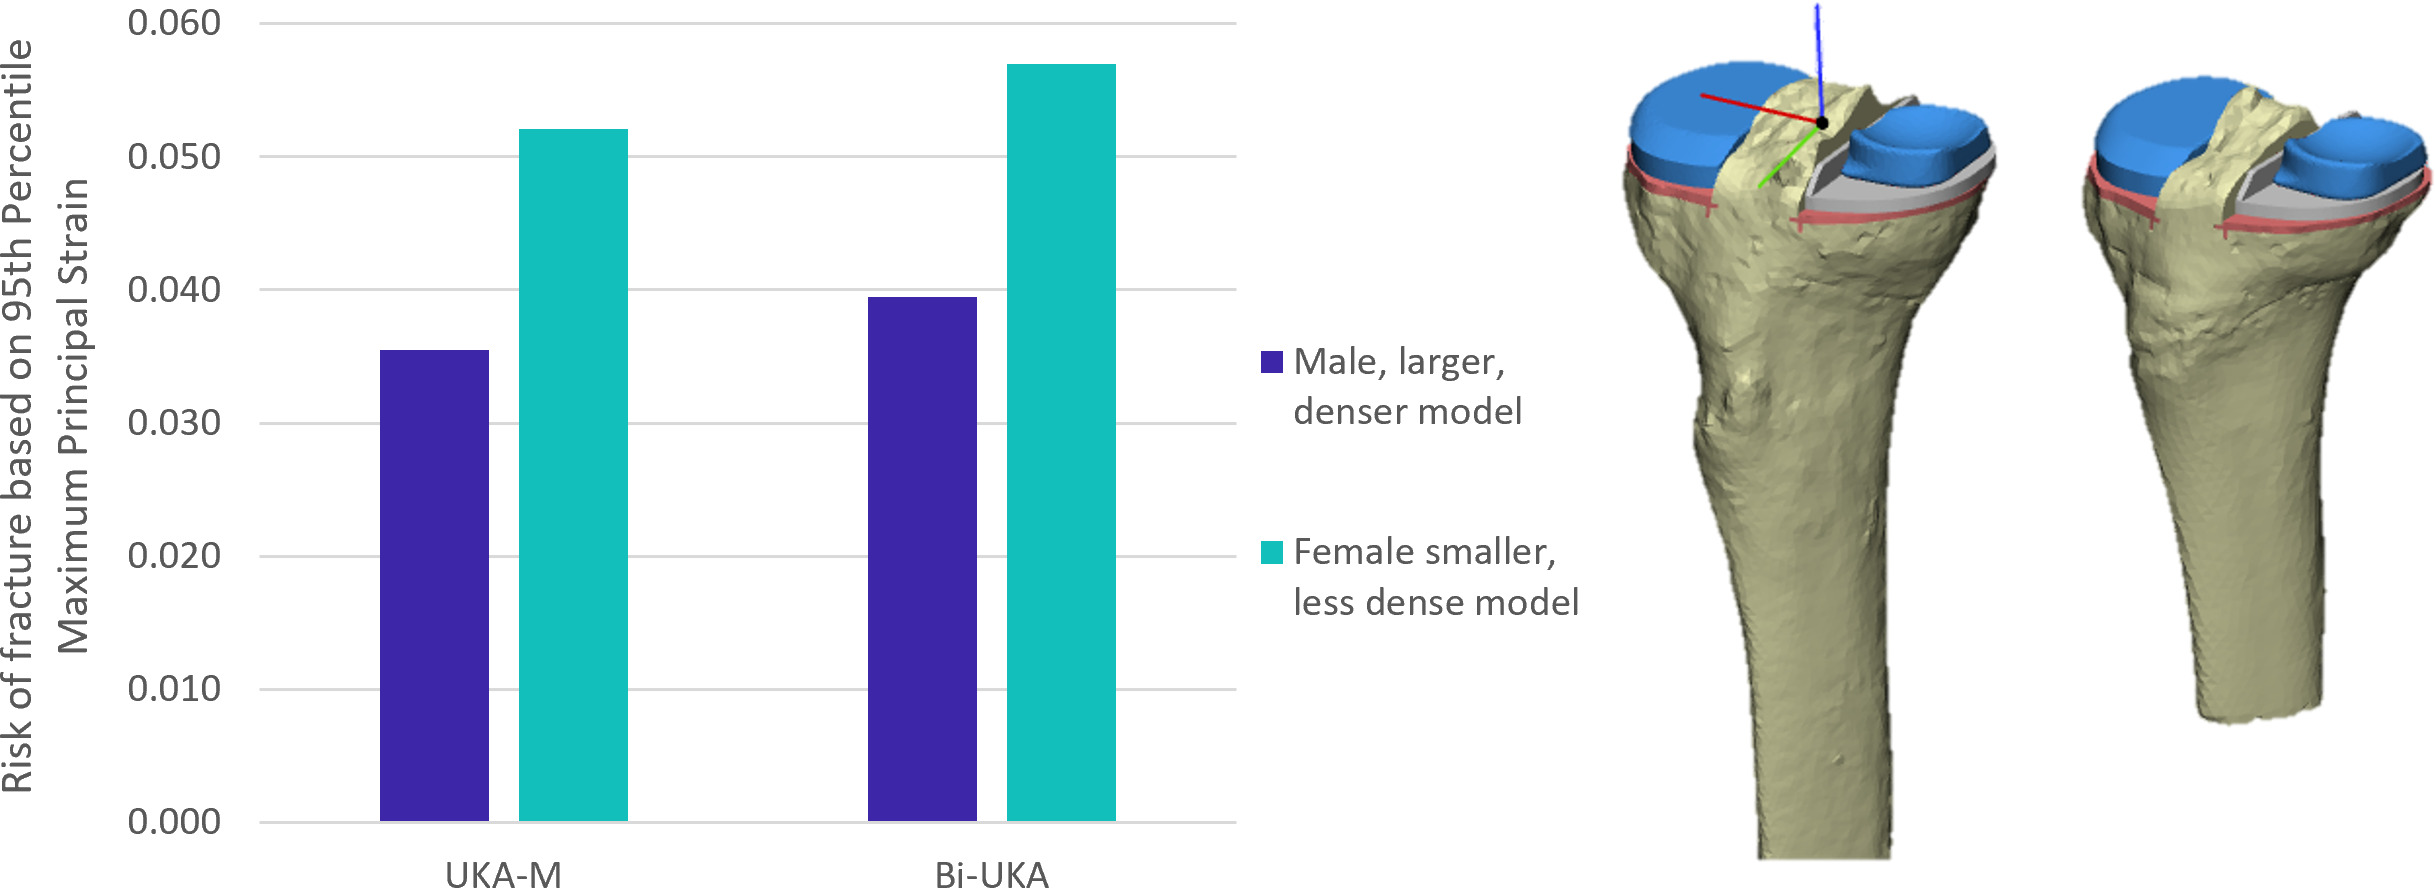 Fig. 5 
            Bar graph showing the risk of fracture in isolated medial unicondylar knee arthroplasty (UKA-M) and bi-unicondylar knee arthroplasty (Bi-UKA) when the knee is balanced in the male (dark blue) and female (turquoise) tibiae.
          